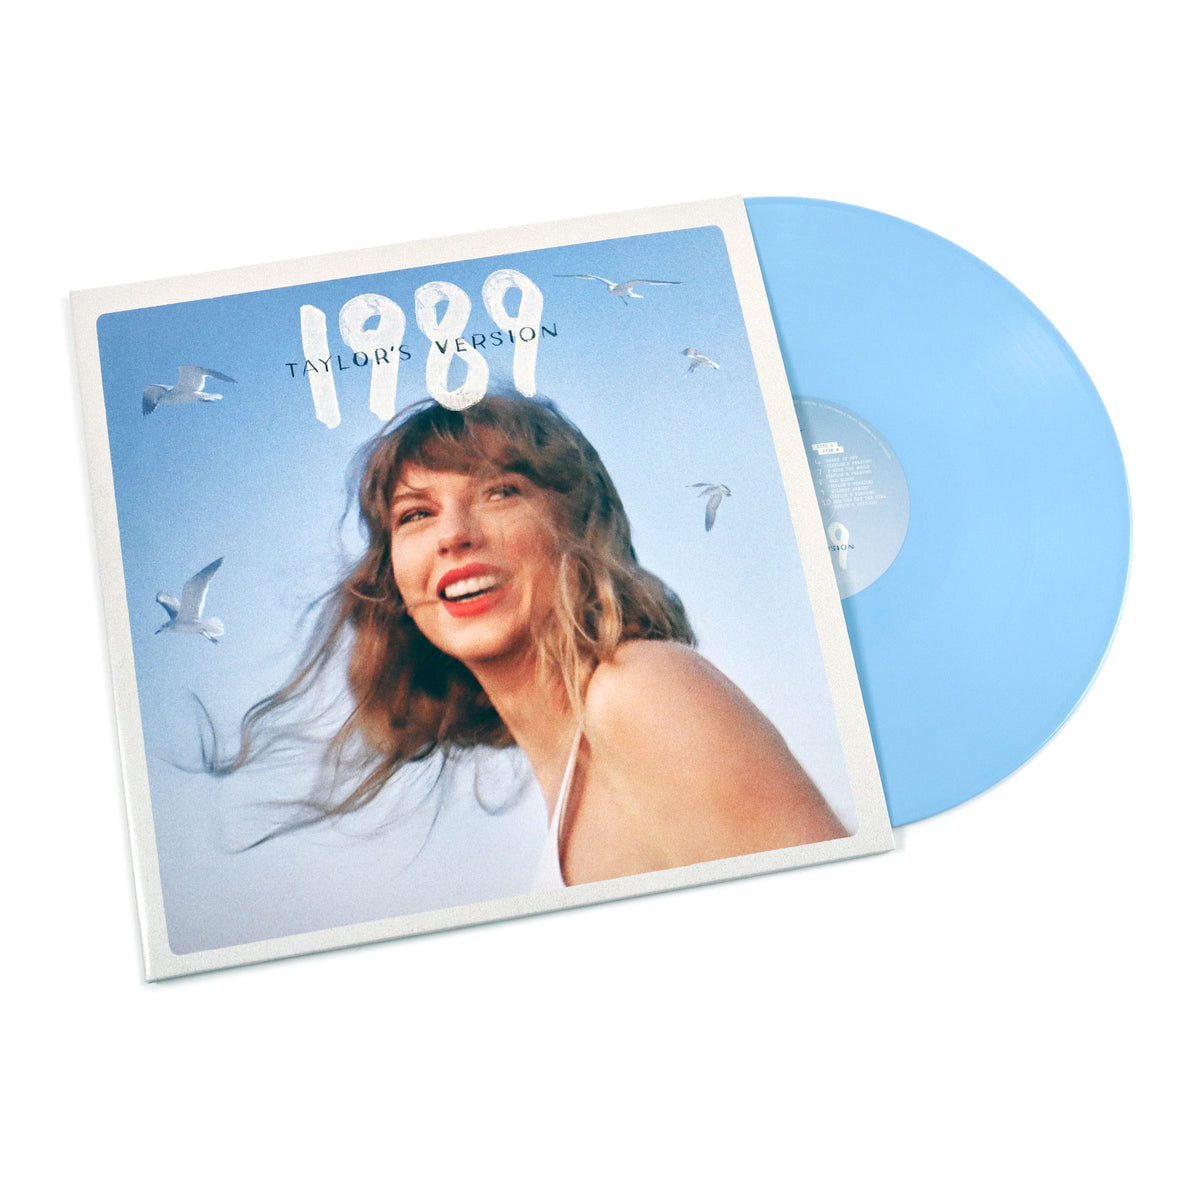 Taylor Swift Vinyl  New & Used Taylor Swift Records for Sale